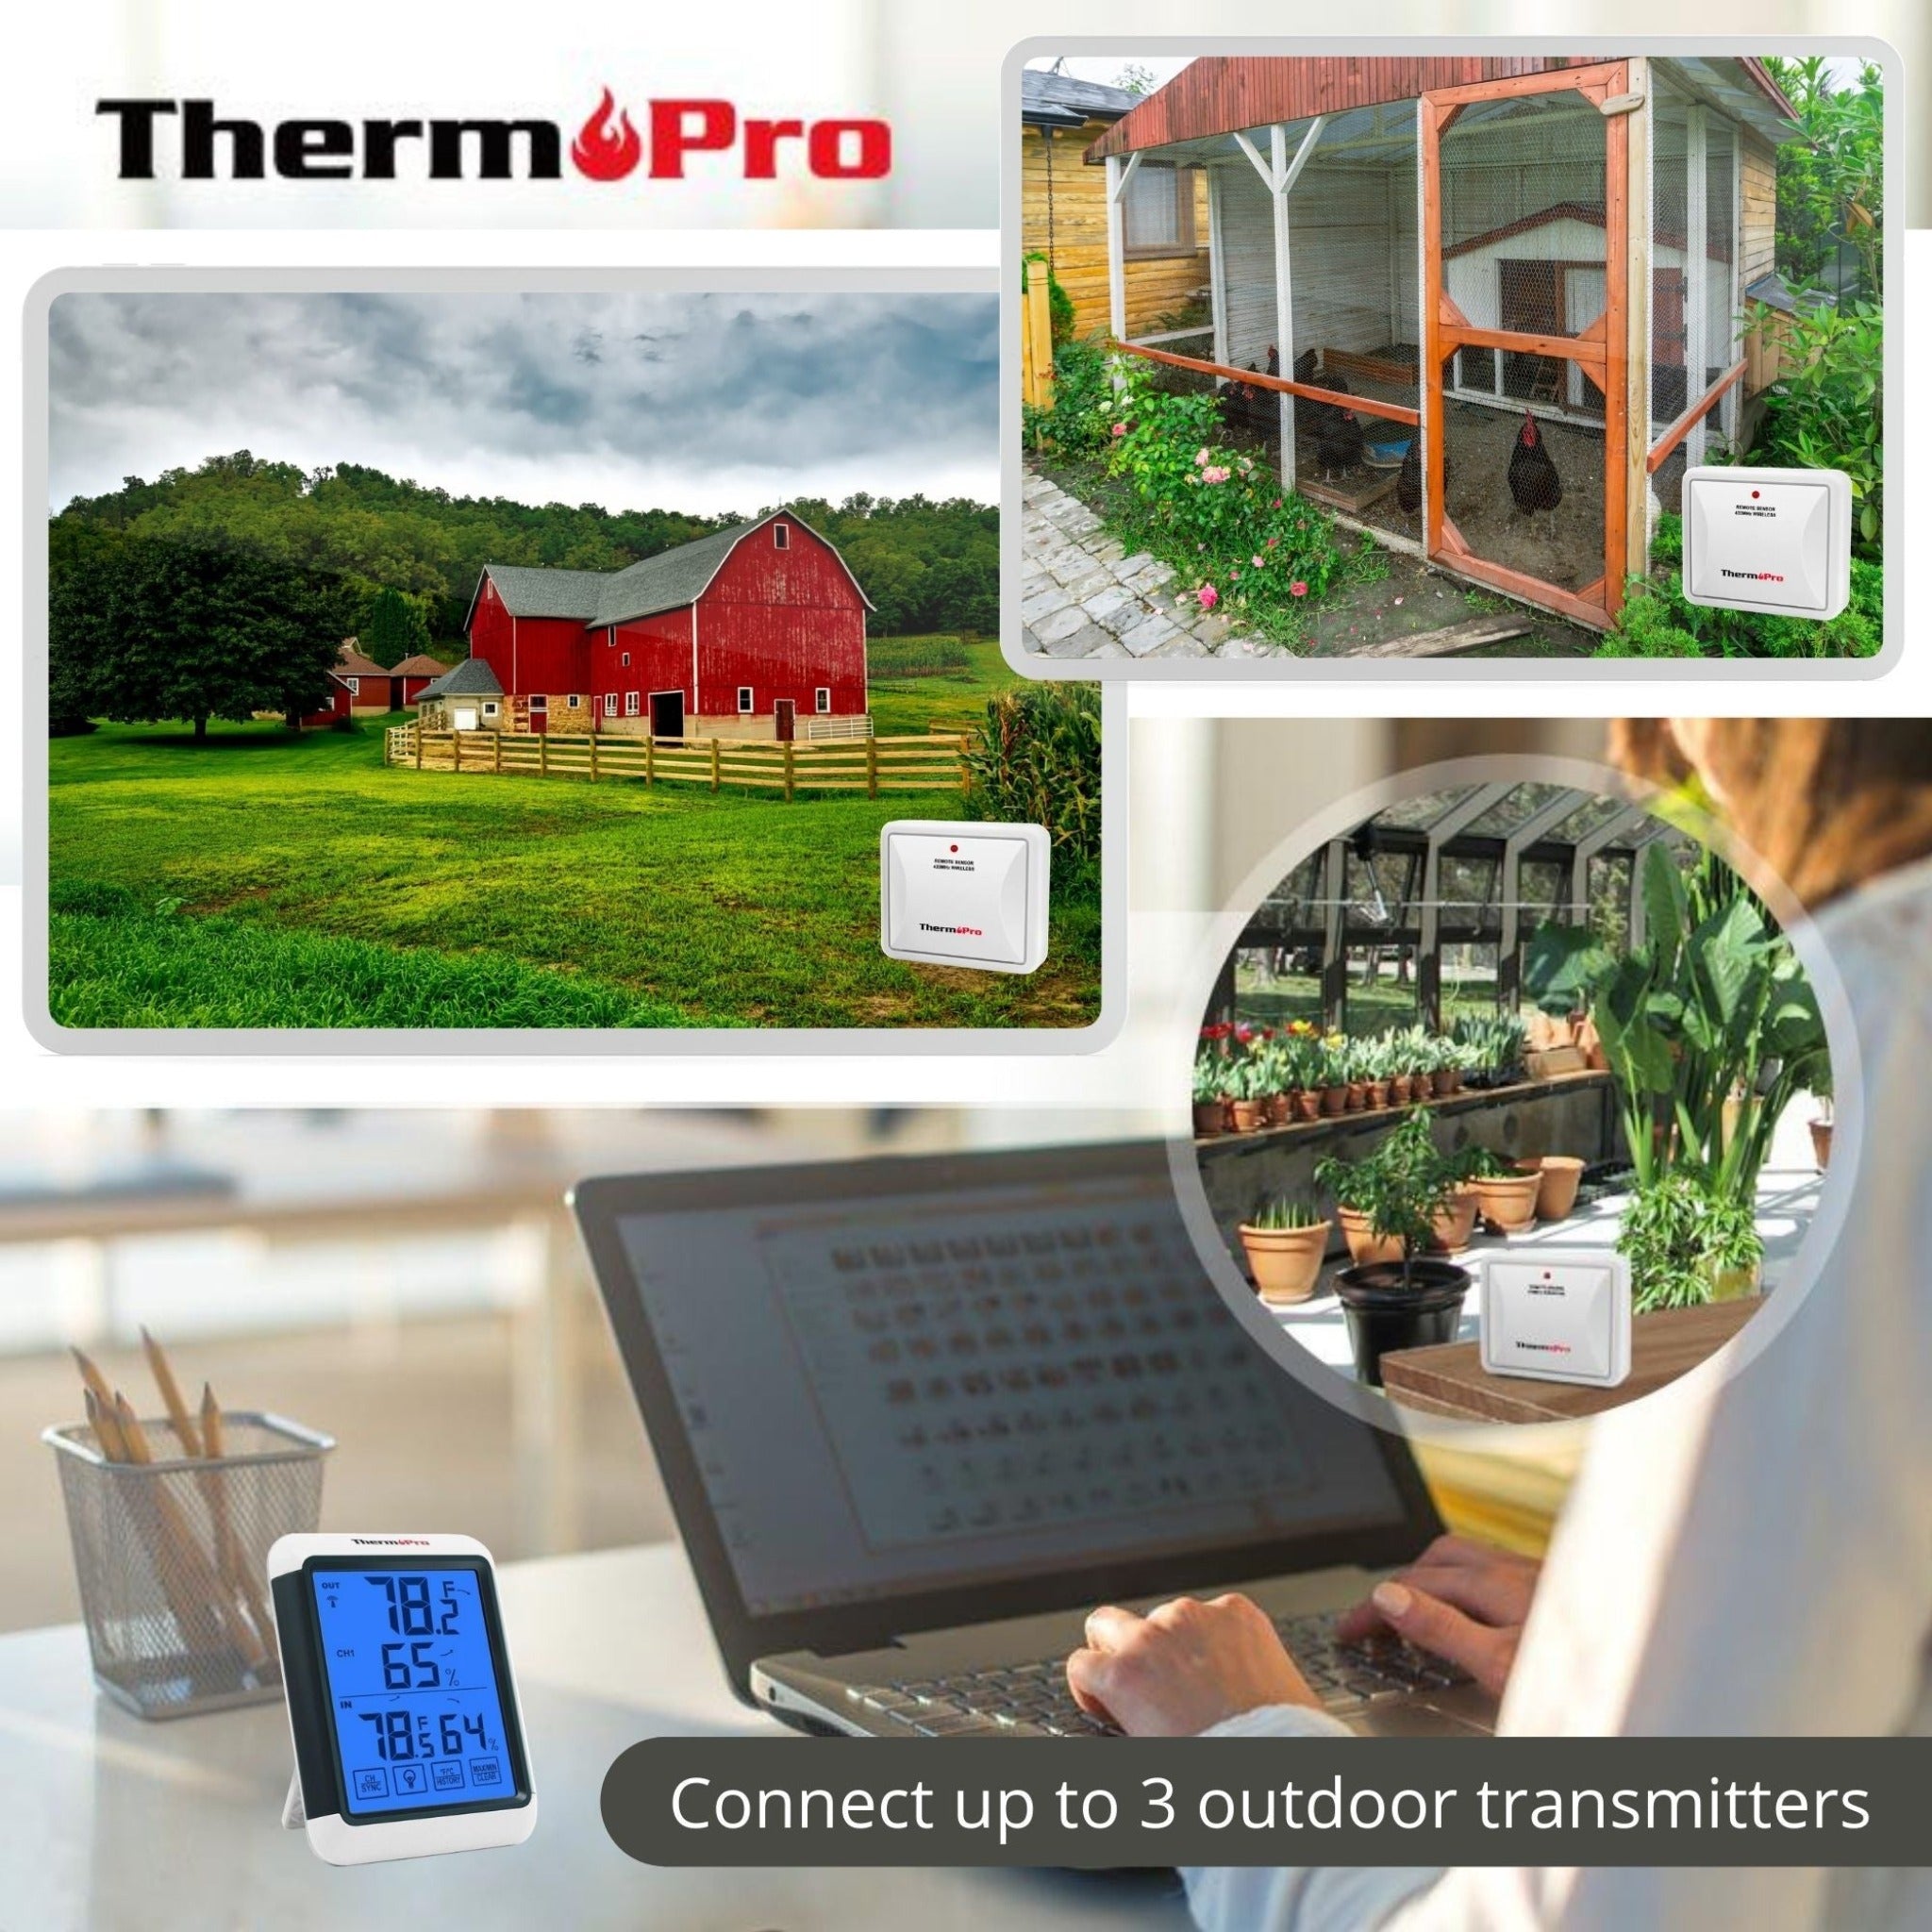 Hatching Time. Therm Pro sensor can be seen depicted in outdoor scenarios. An outside chicken coop, and barn house. Digital display can be seen inside next to someone monitoring up to 3 outdoor transmitters.